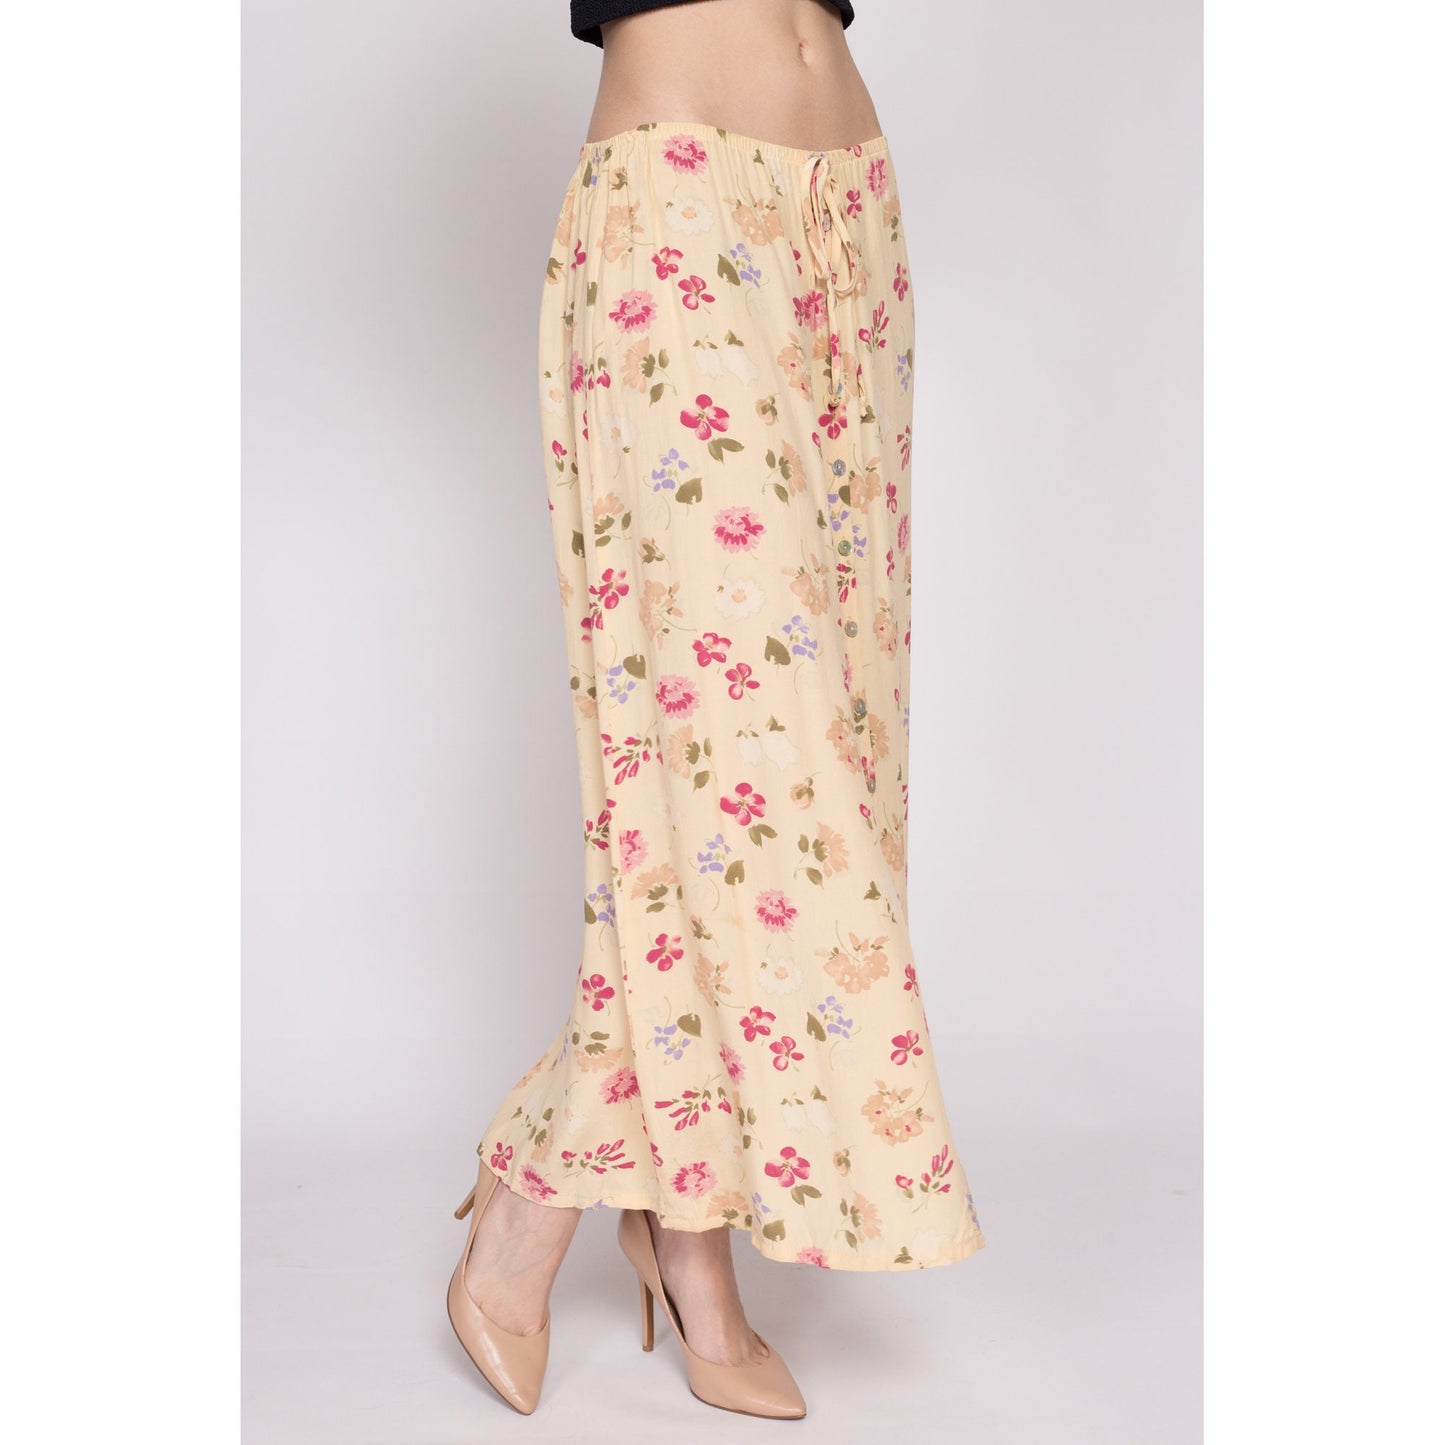 M| 90s Butter Yellow Floral A Line Skirt - Medium | Vintage High Waisted Button Front Boho Midi Skirt